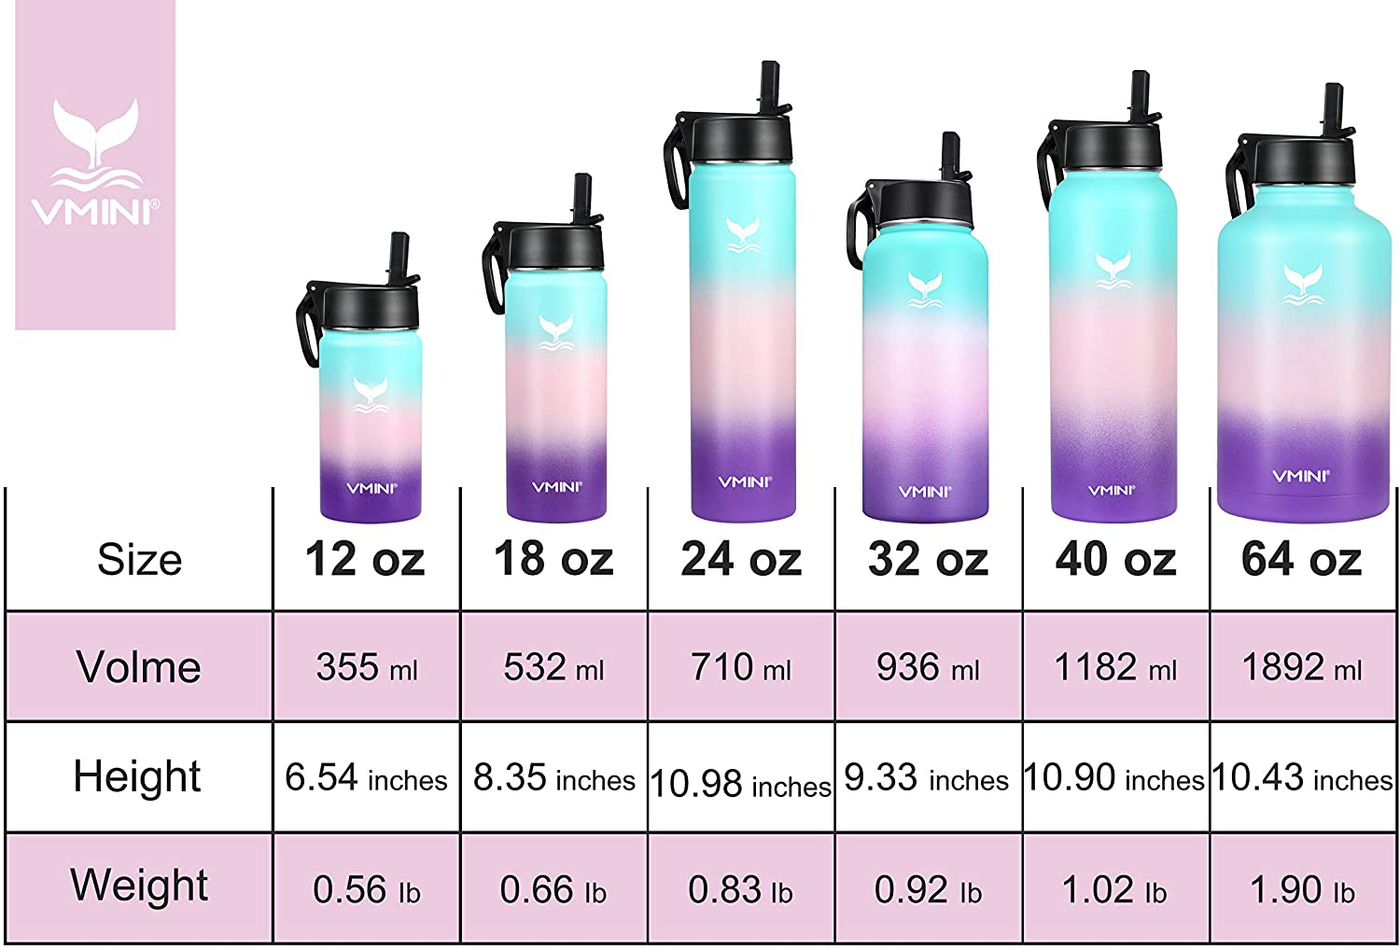 Vmini Water Bottle with New Wide Handle Straw Lid, Wide Mouth Vacuum Insulated 18/8 Stainless Steel, 32 oz, Gradient Mint + Pink + Purple